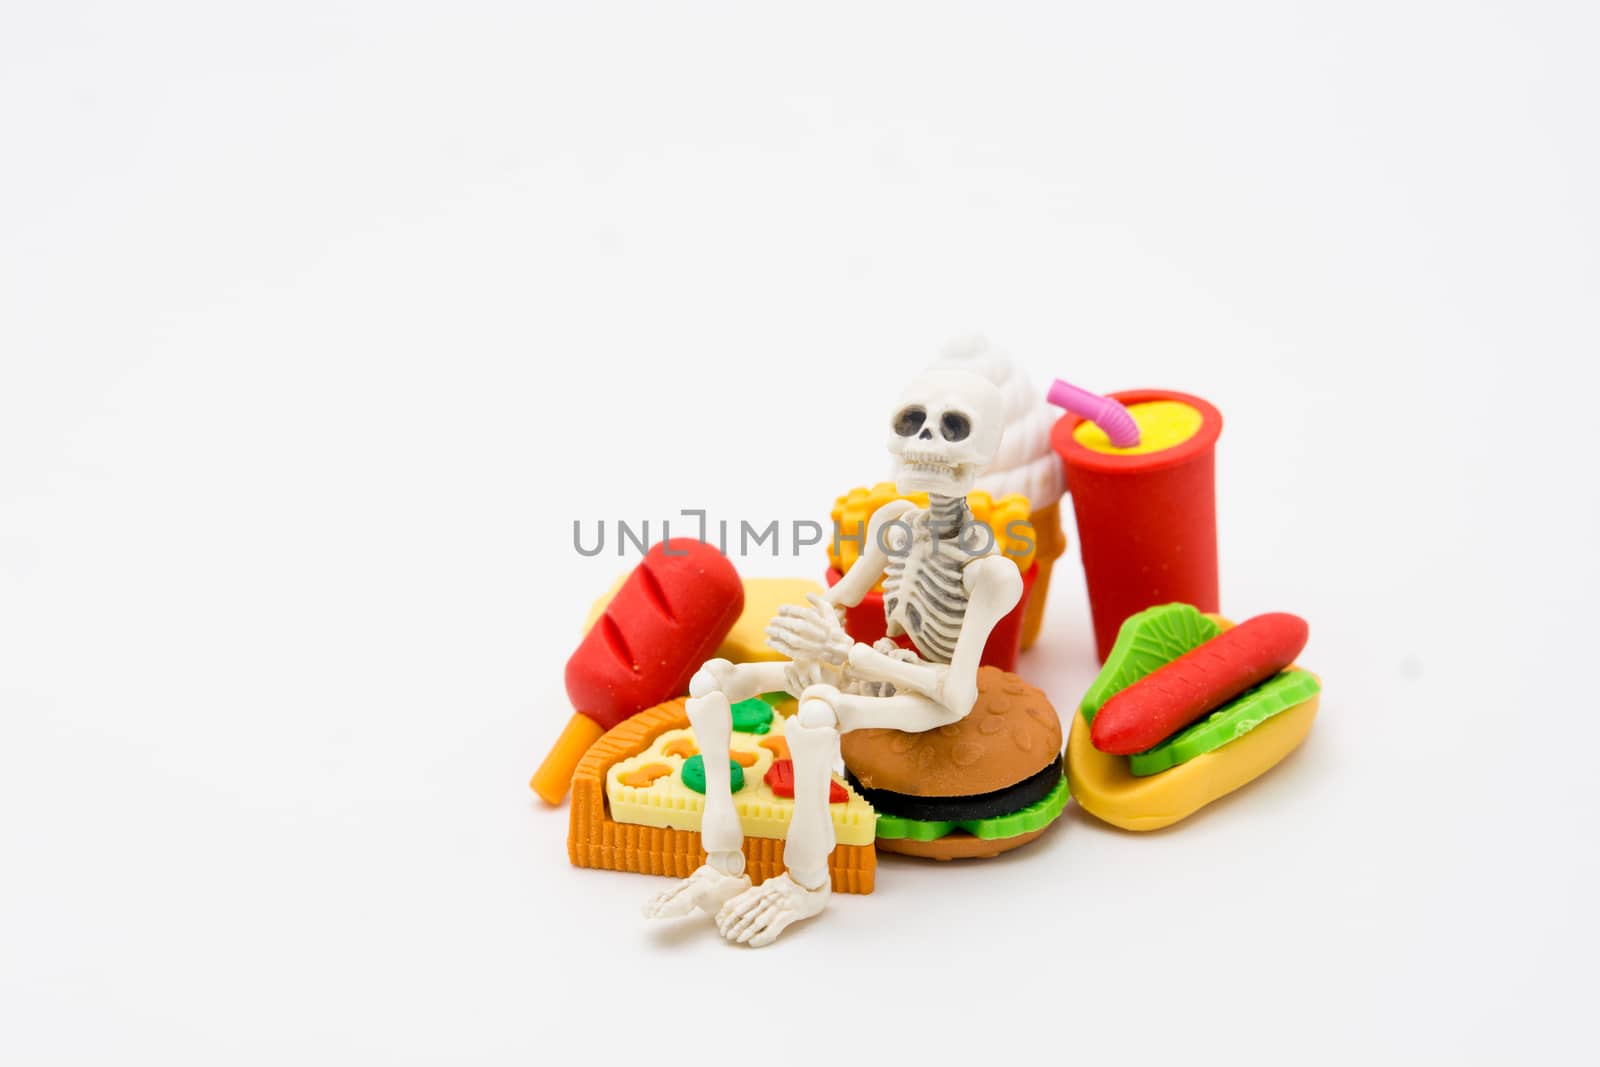 Skeleton and foods, enjoy eating until death by yuiyuize